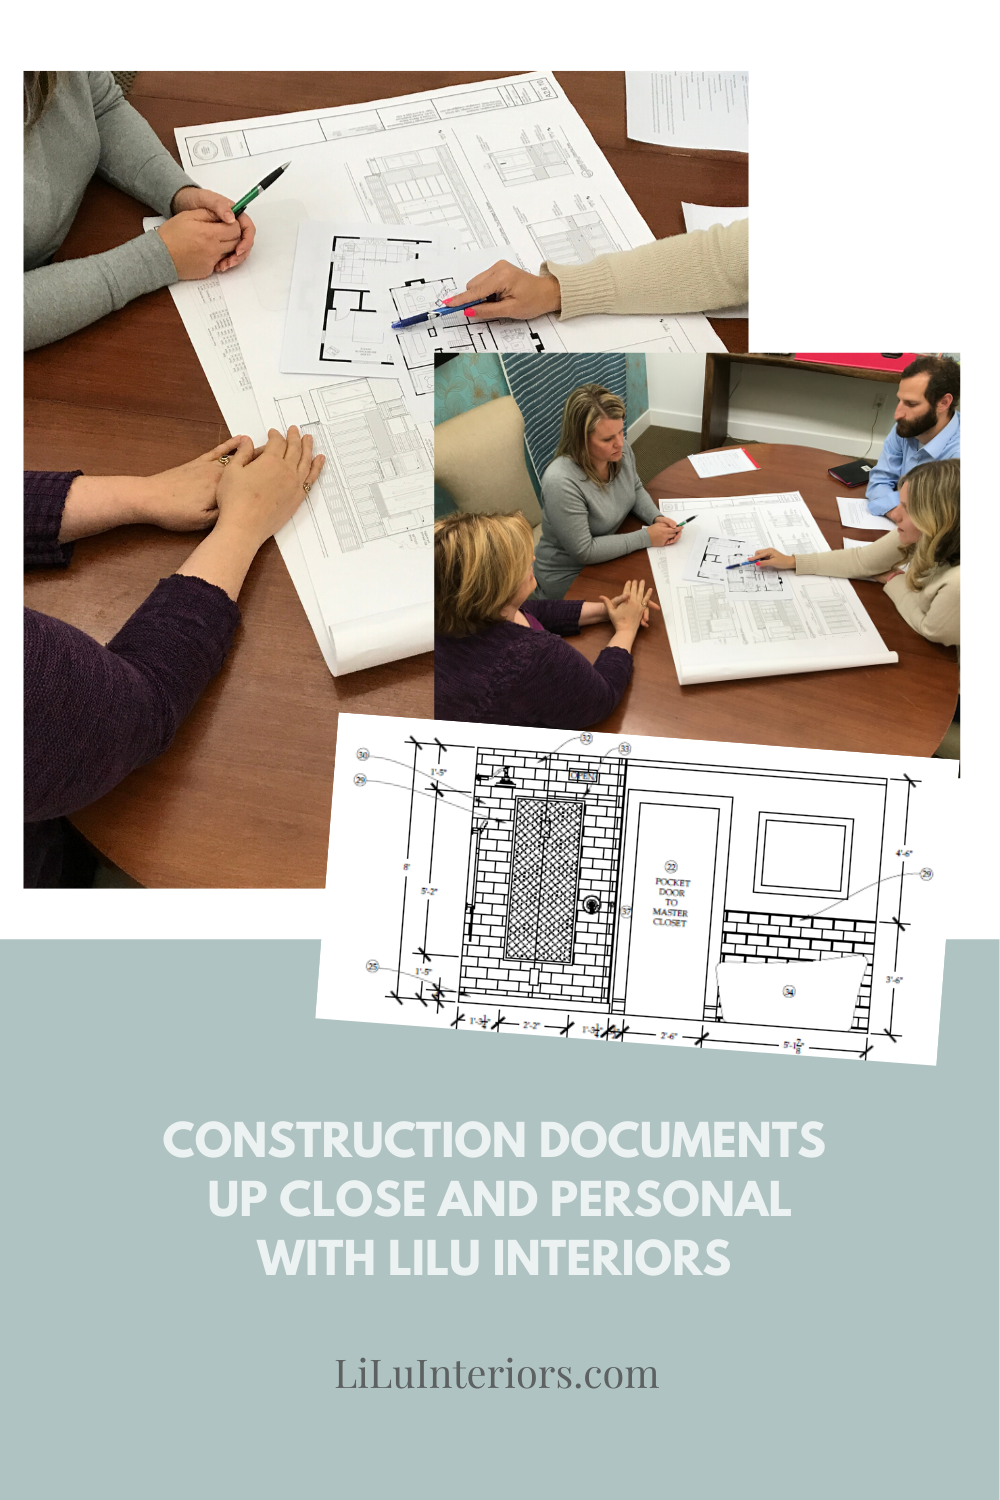 Up Close and Personal Construction Documents